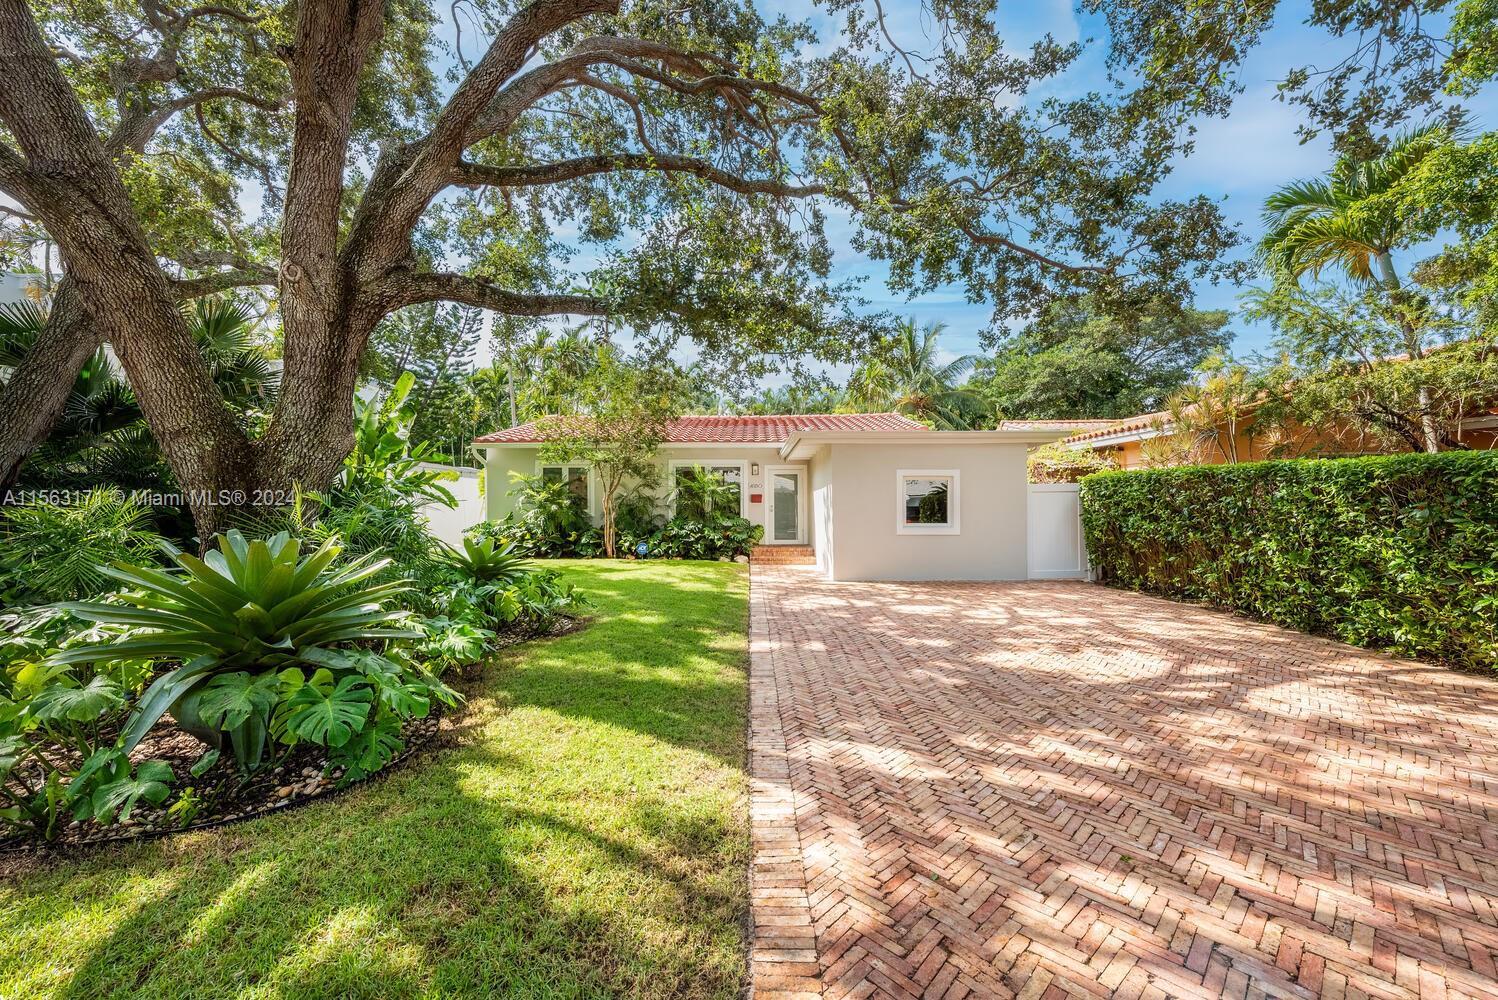 A completely renovated 3 bed / 2 bath home located in prestigious South Grove awaits a discerning bu